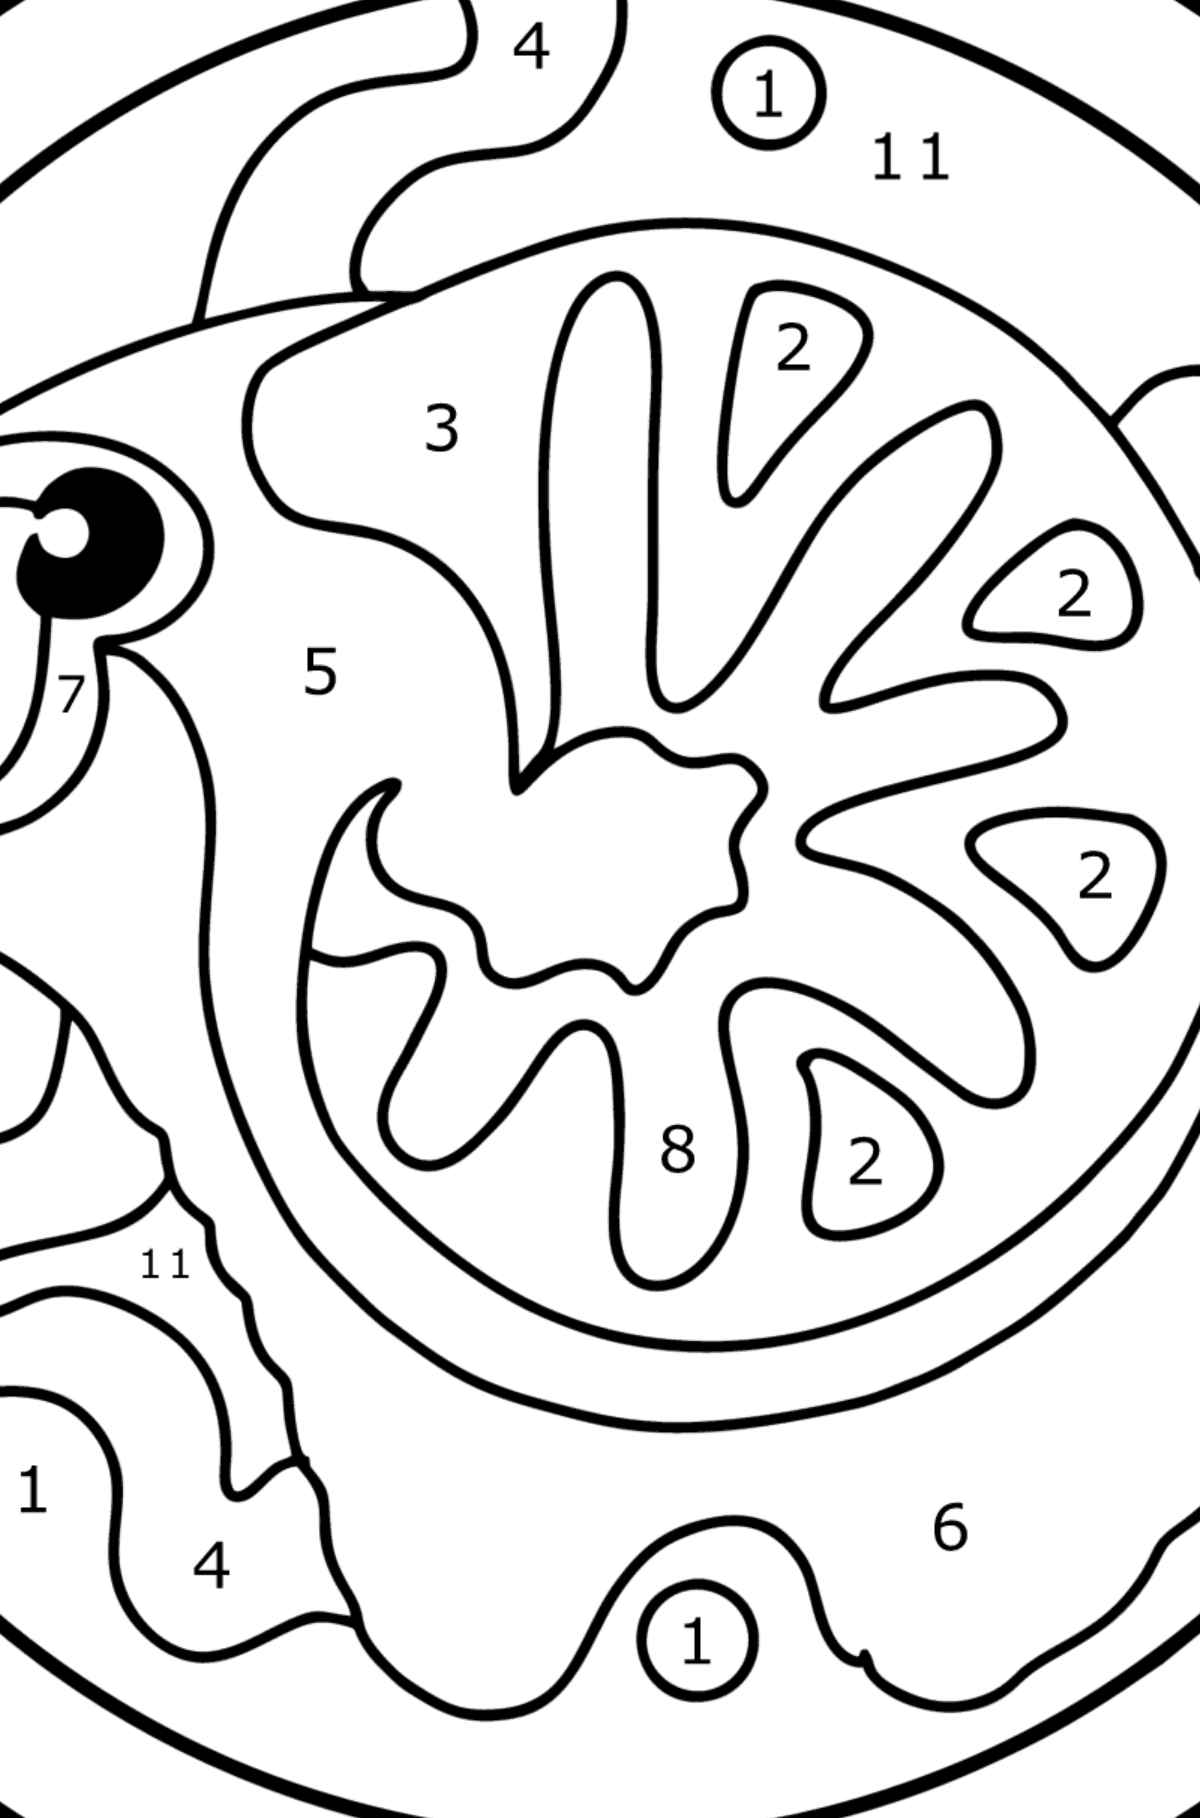 Coloring page for kids - zodiac sign Aries - Coloring by Numbers for Kids